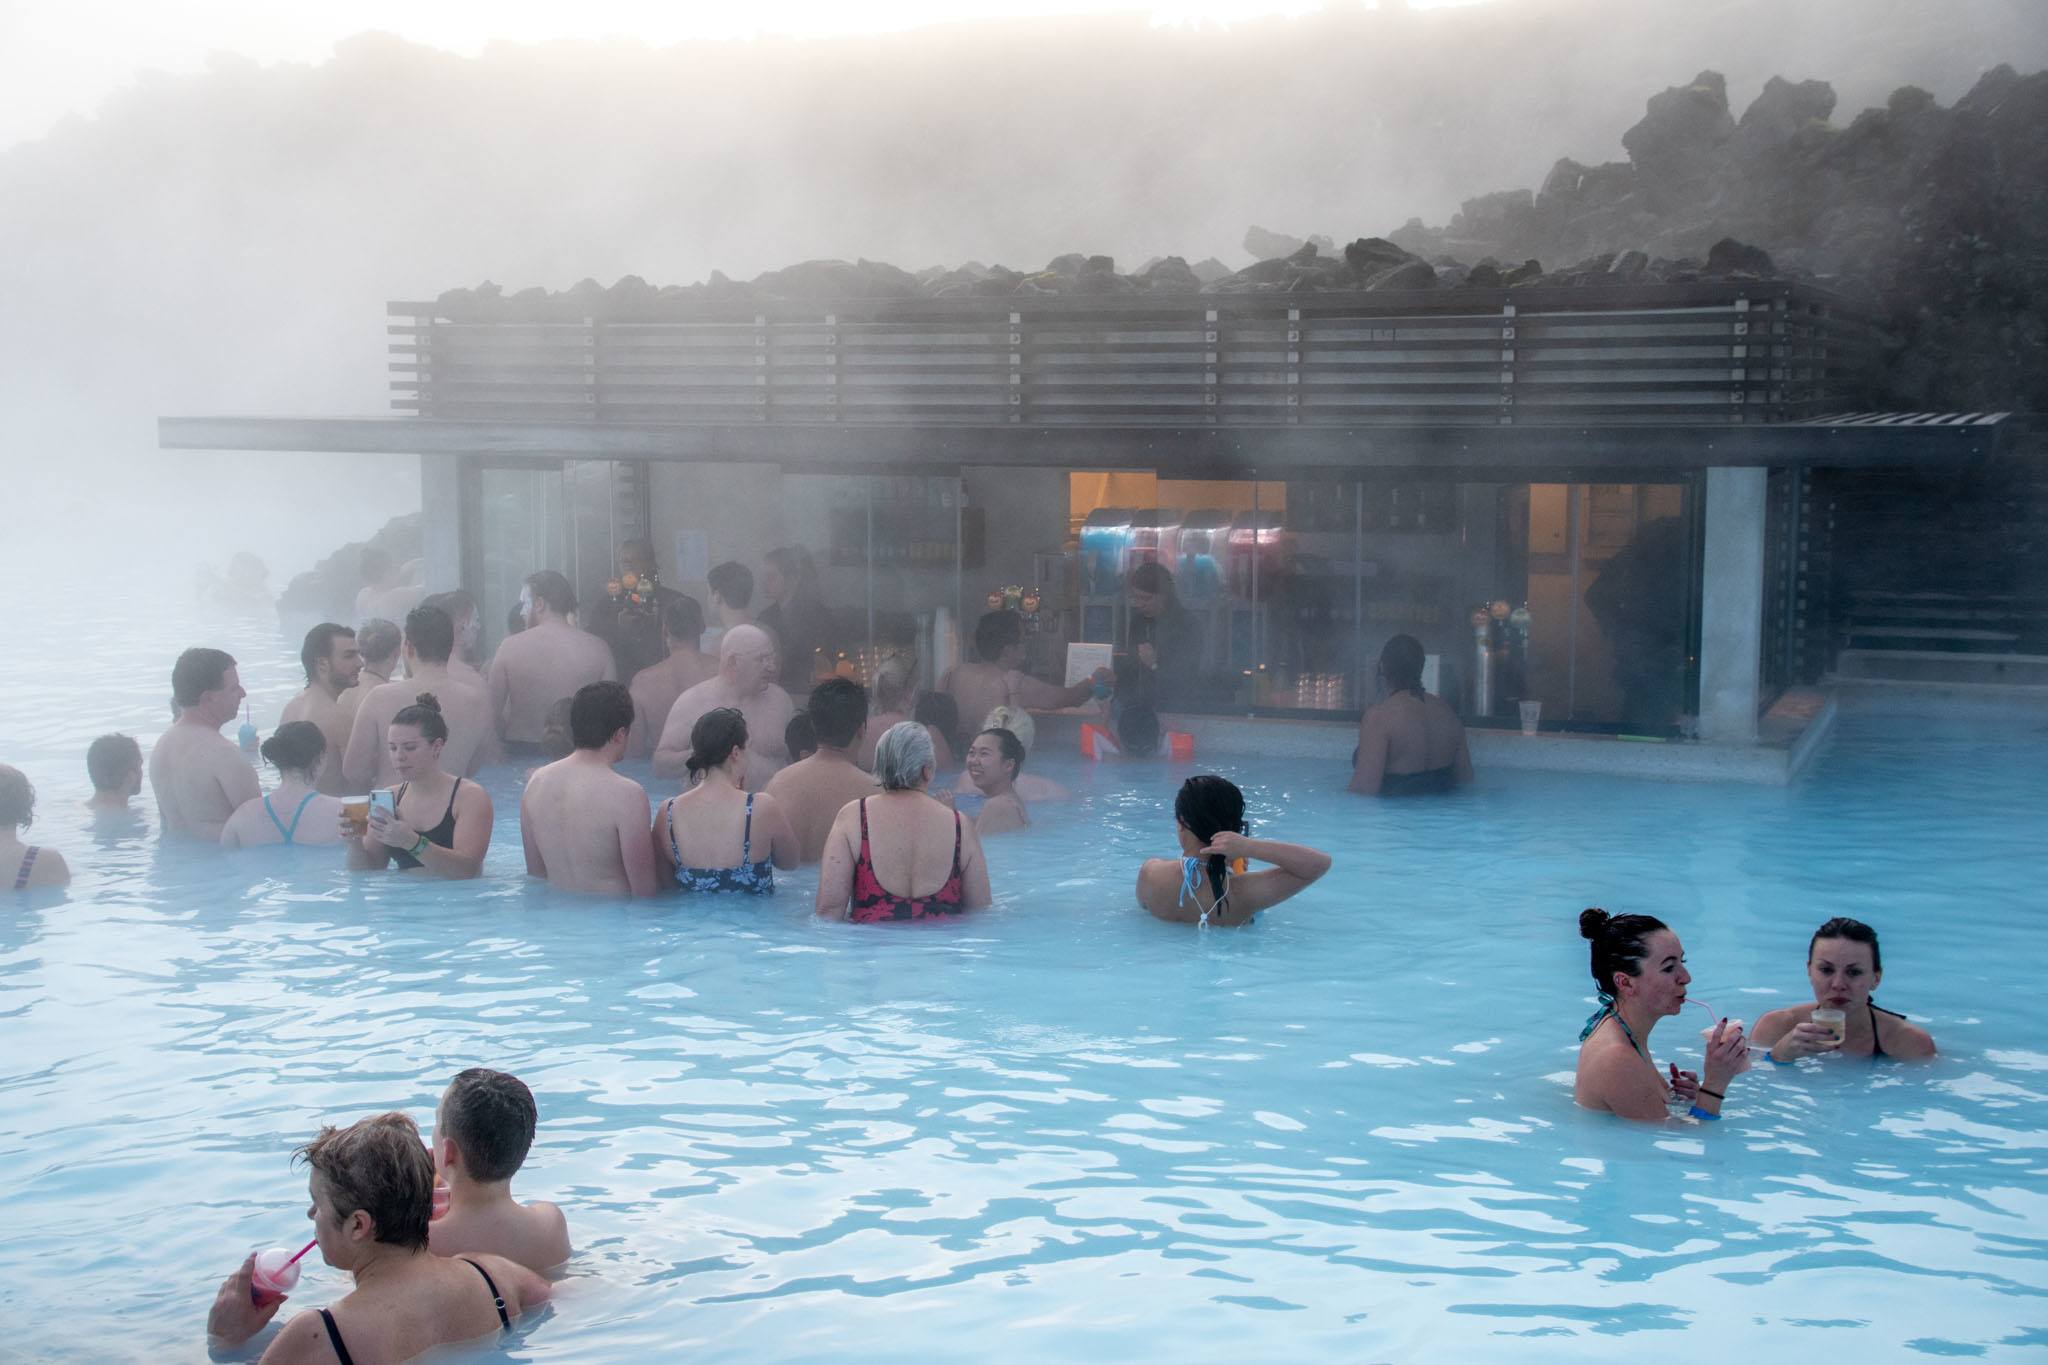 Crowd of people at a swim-up bar